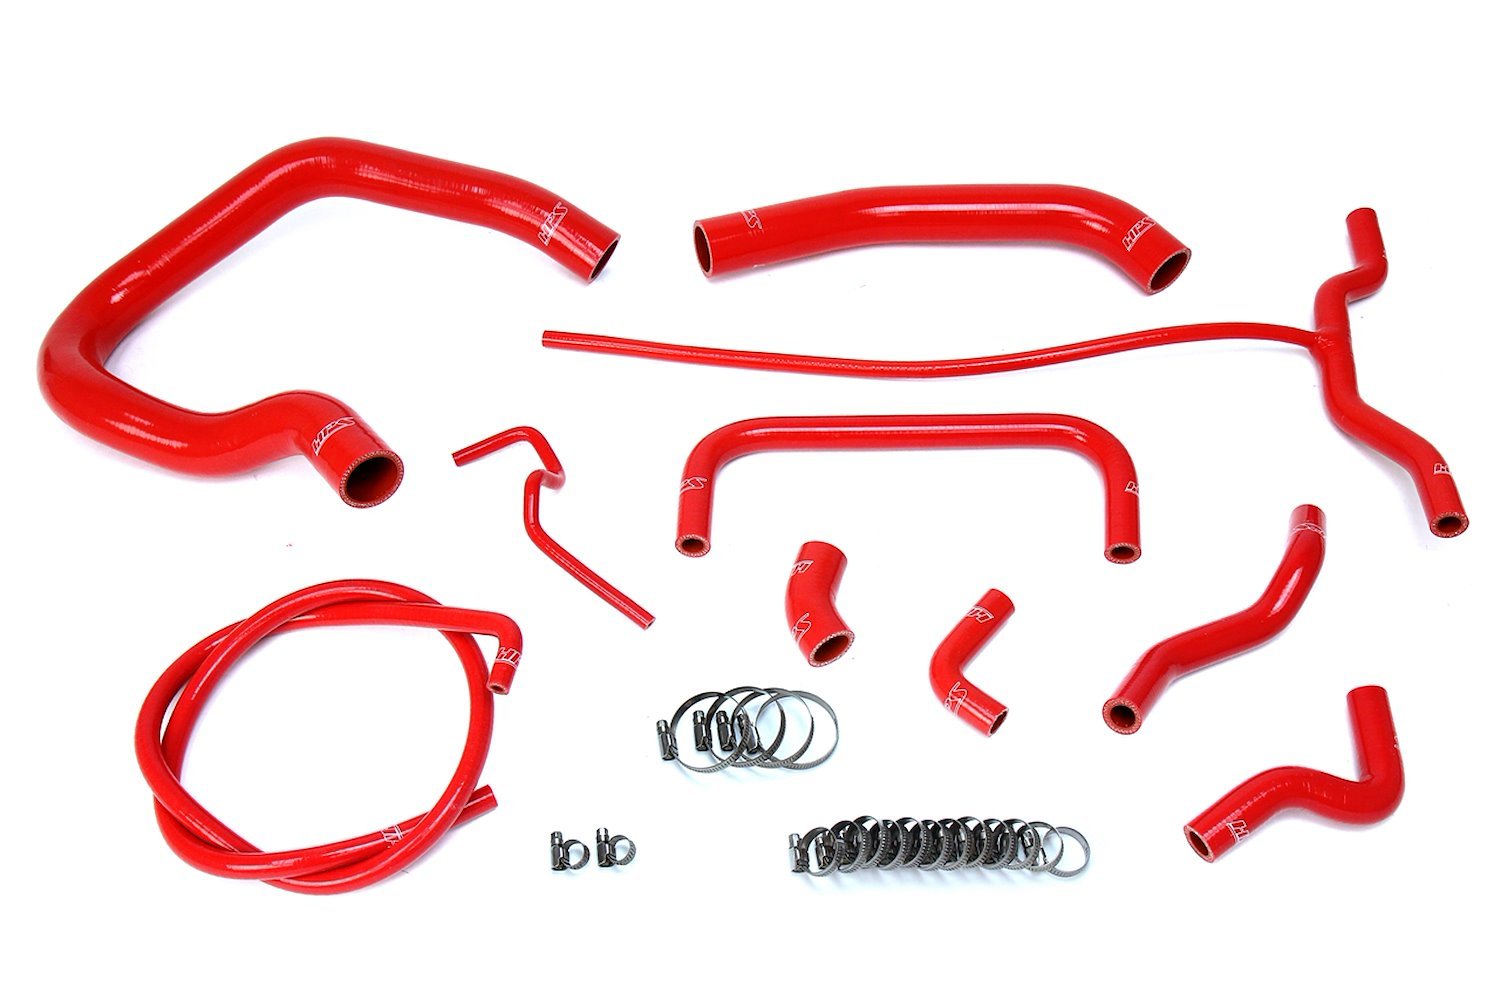 57-1661-RED Coolant Hose Kit, High-Temp 3-Ply Reinforced Silicone, Replace Rubber Radiator Heater Coolant Hoses